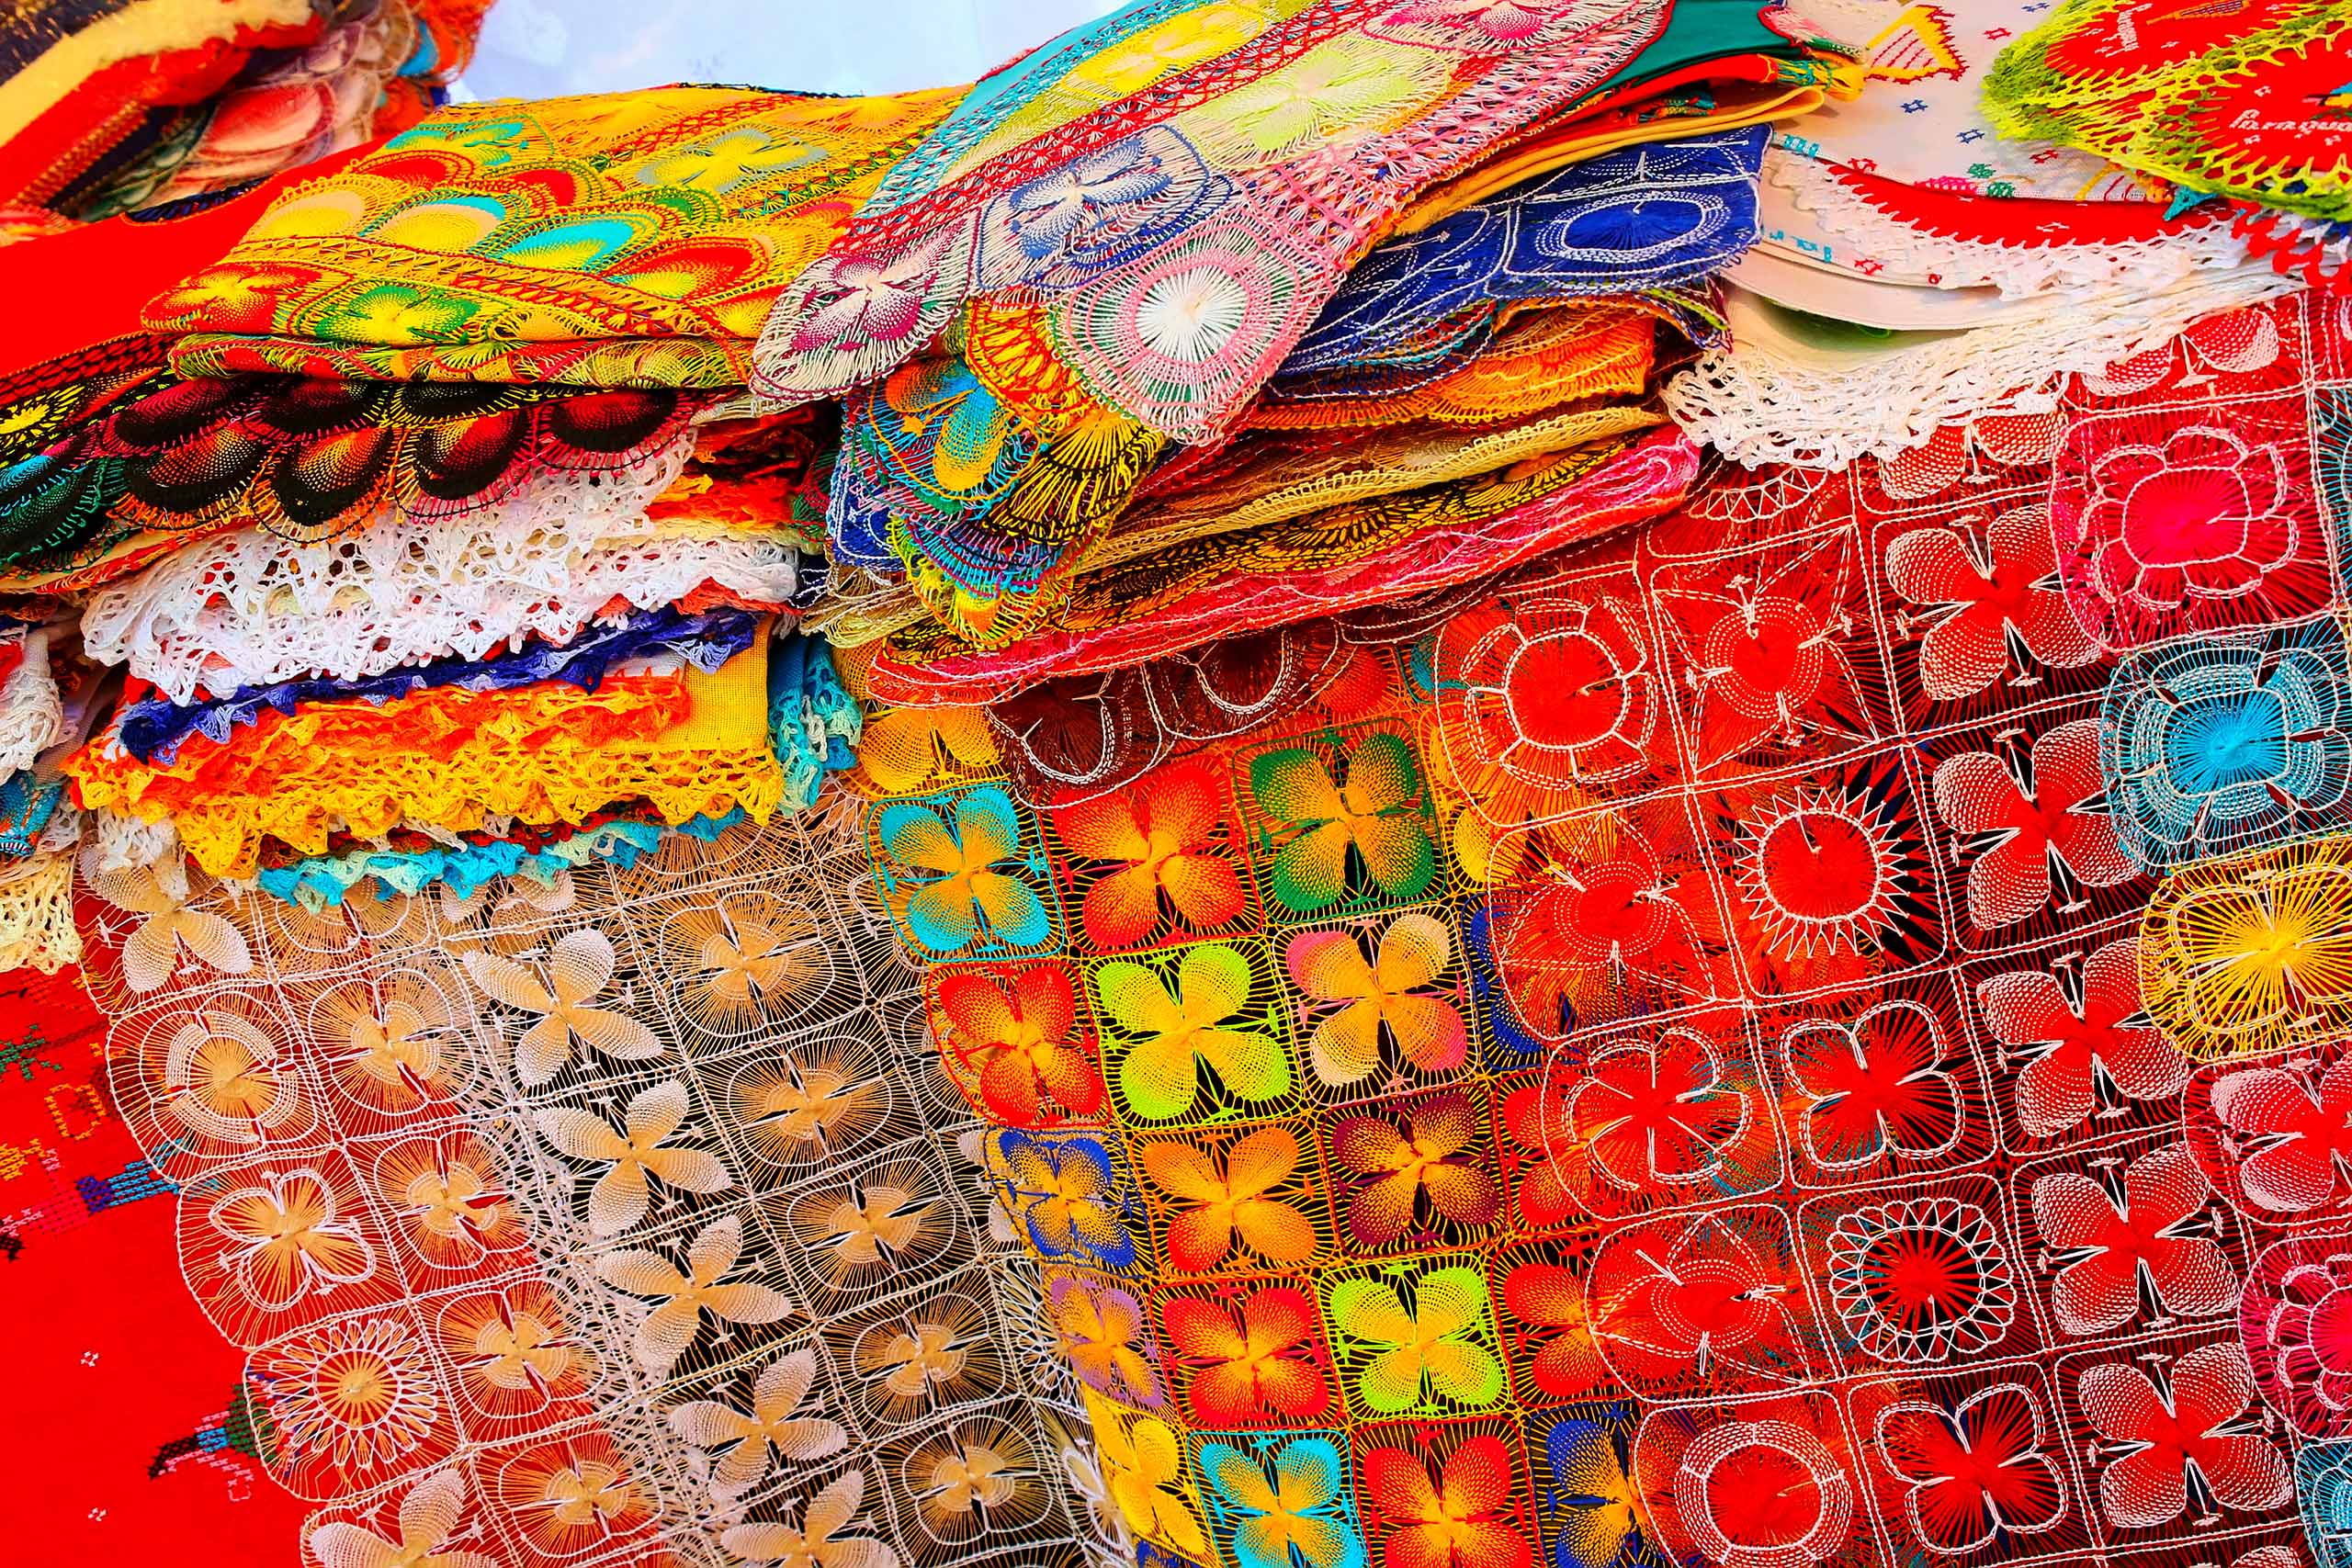 Display of nanduti at the street market in Asuncion, Paraguay. Nanduti is a traditional Paraguayan embroidered lace, introduced by the Spaniards